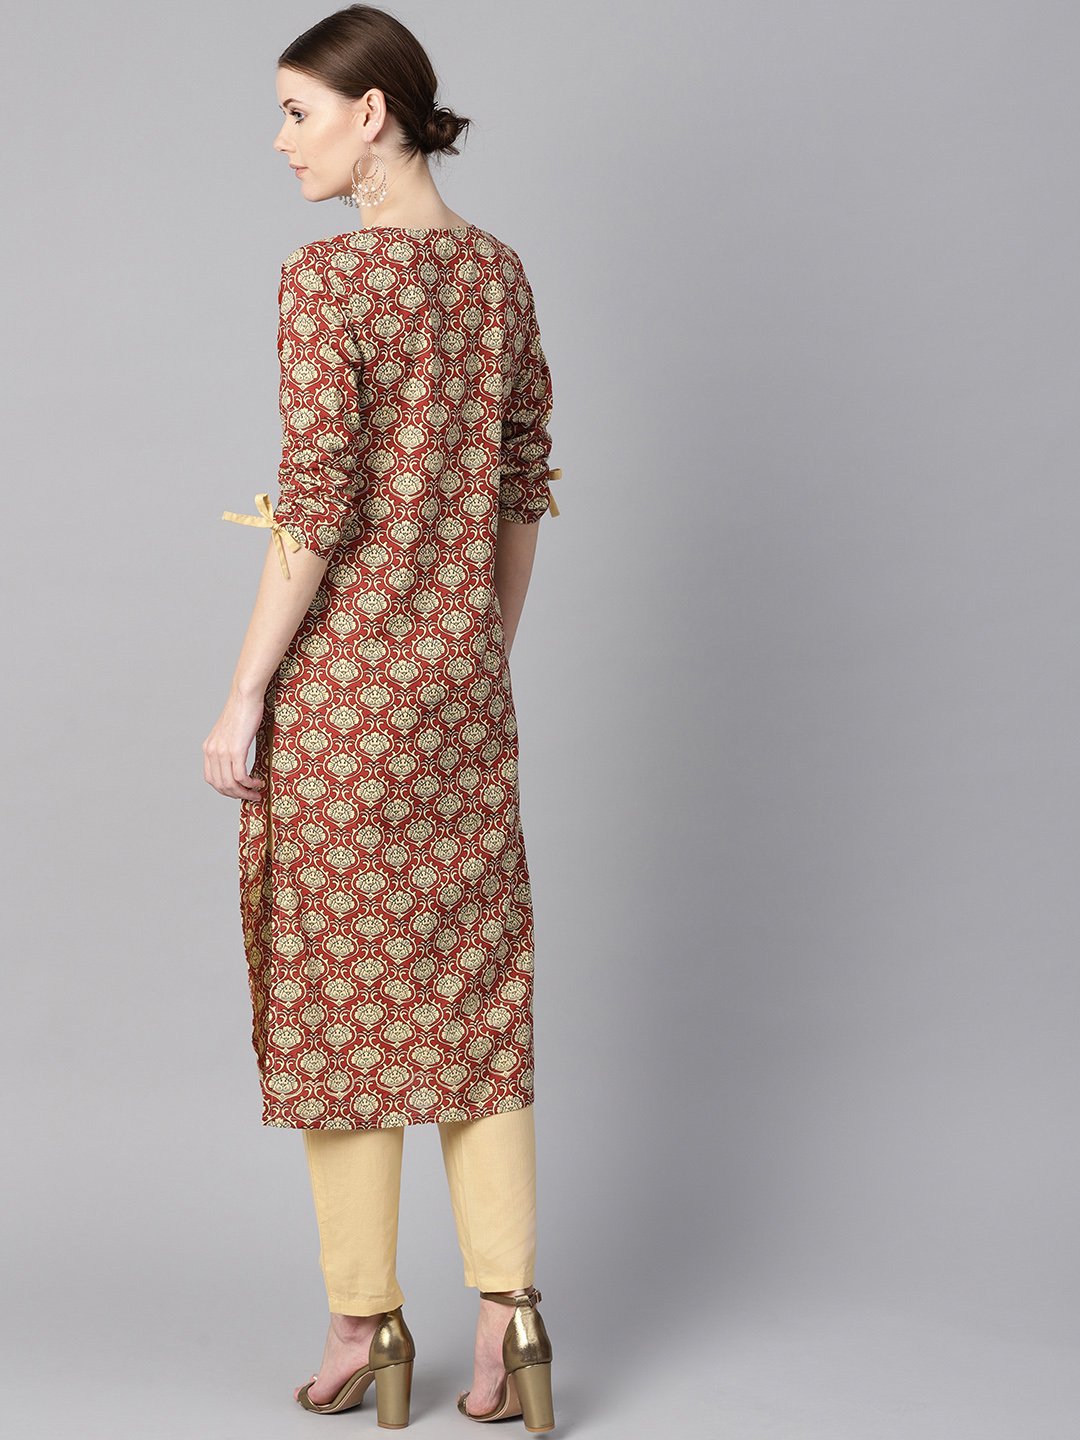 Women's Maroon Floral Printed Kurta With Draw String Detailed Sleeves And Pale Yellow Pants - Nayo Clothing